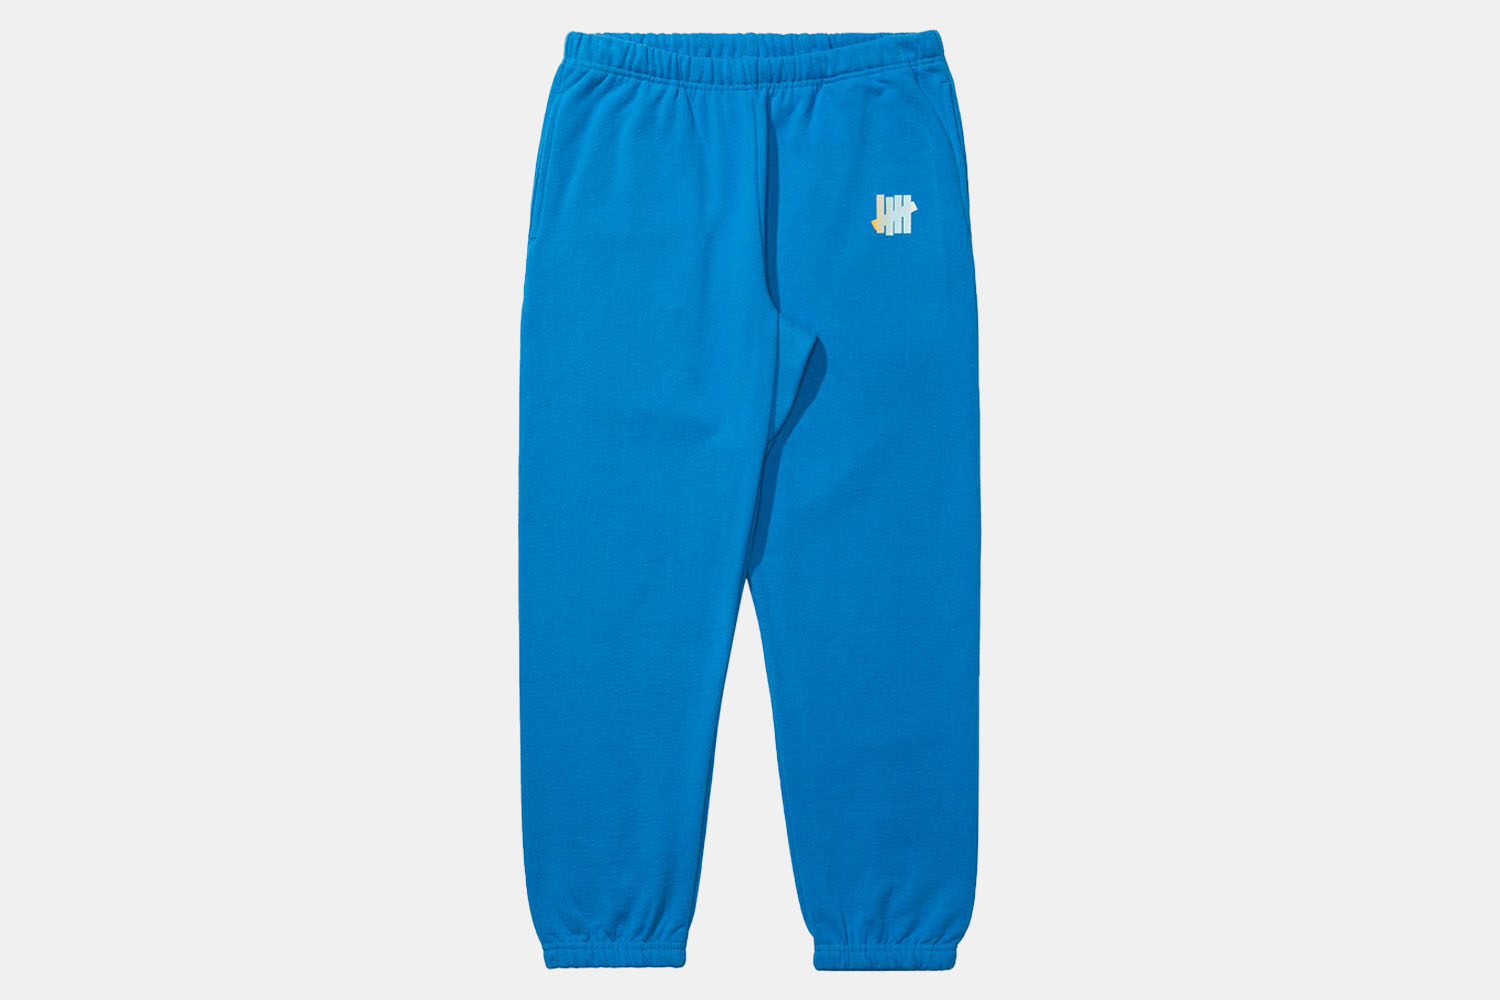 a pair of bright blue sweatpants 